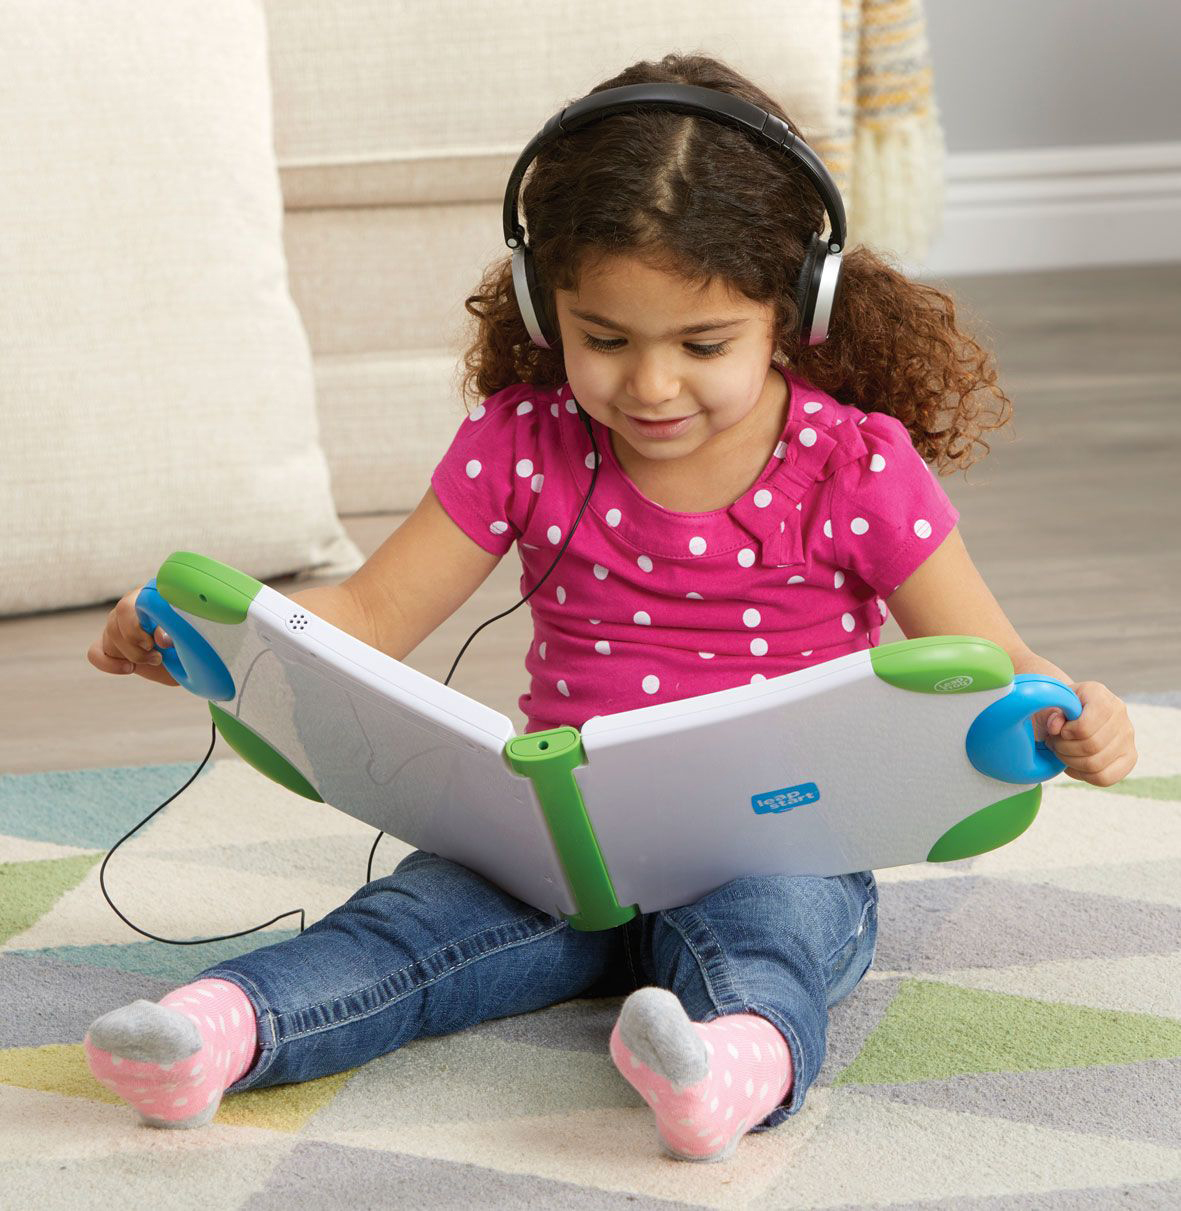 LeapFrog® introduces new engaging content for LeapStart™ Learning System, available now.